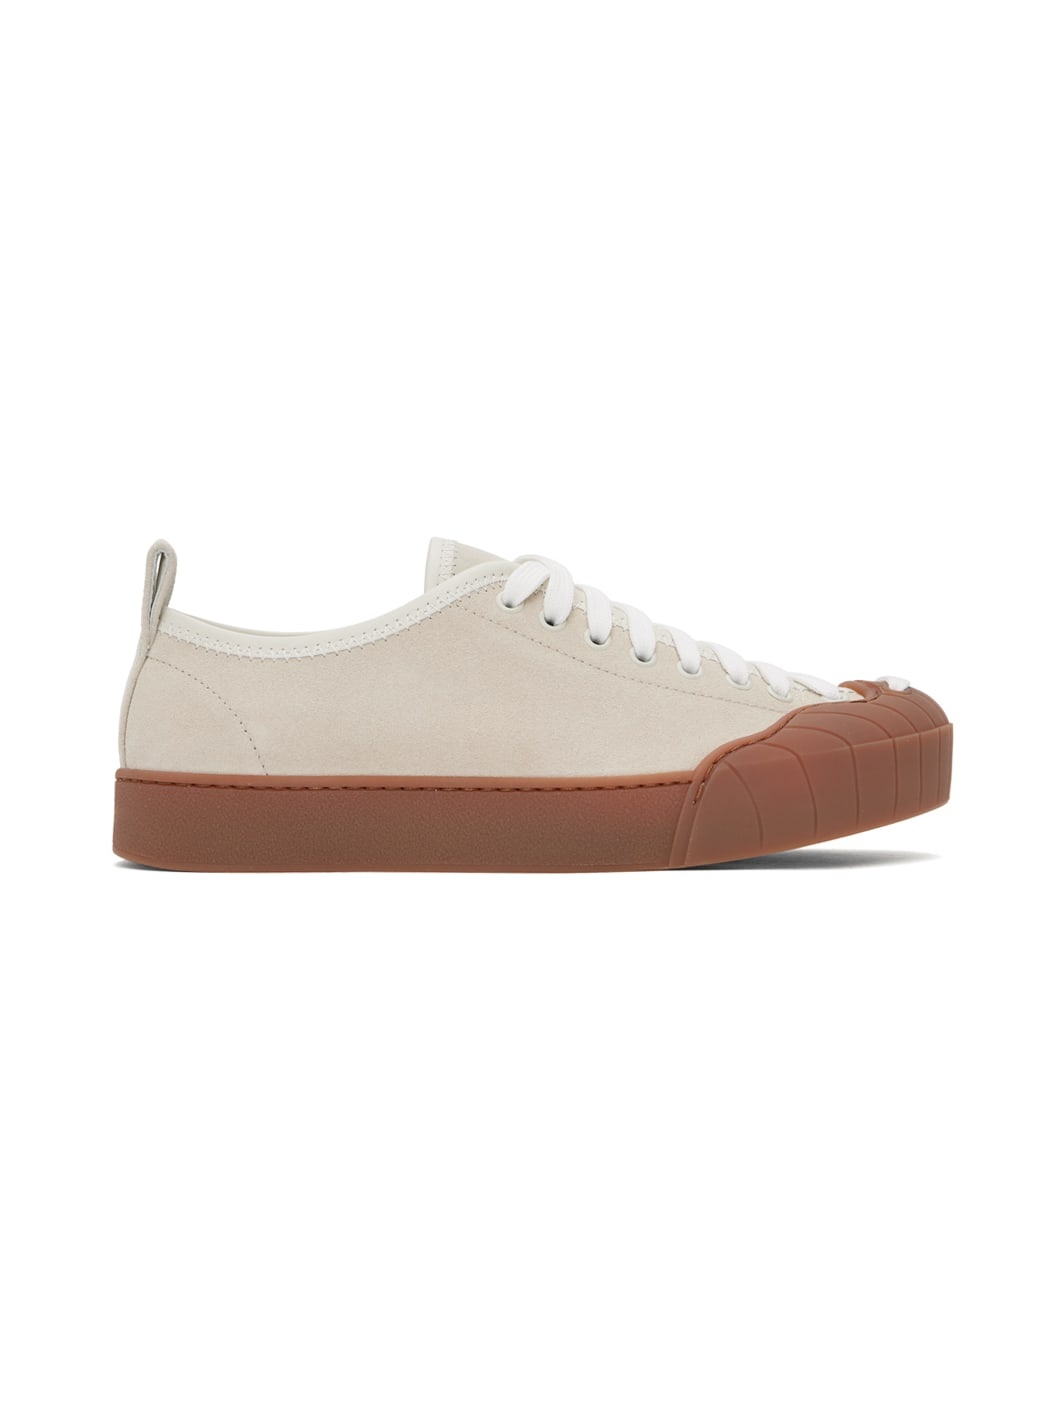 Off-White Isi Low Sneakers - 1